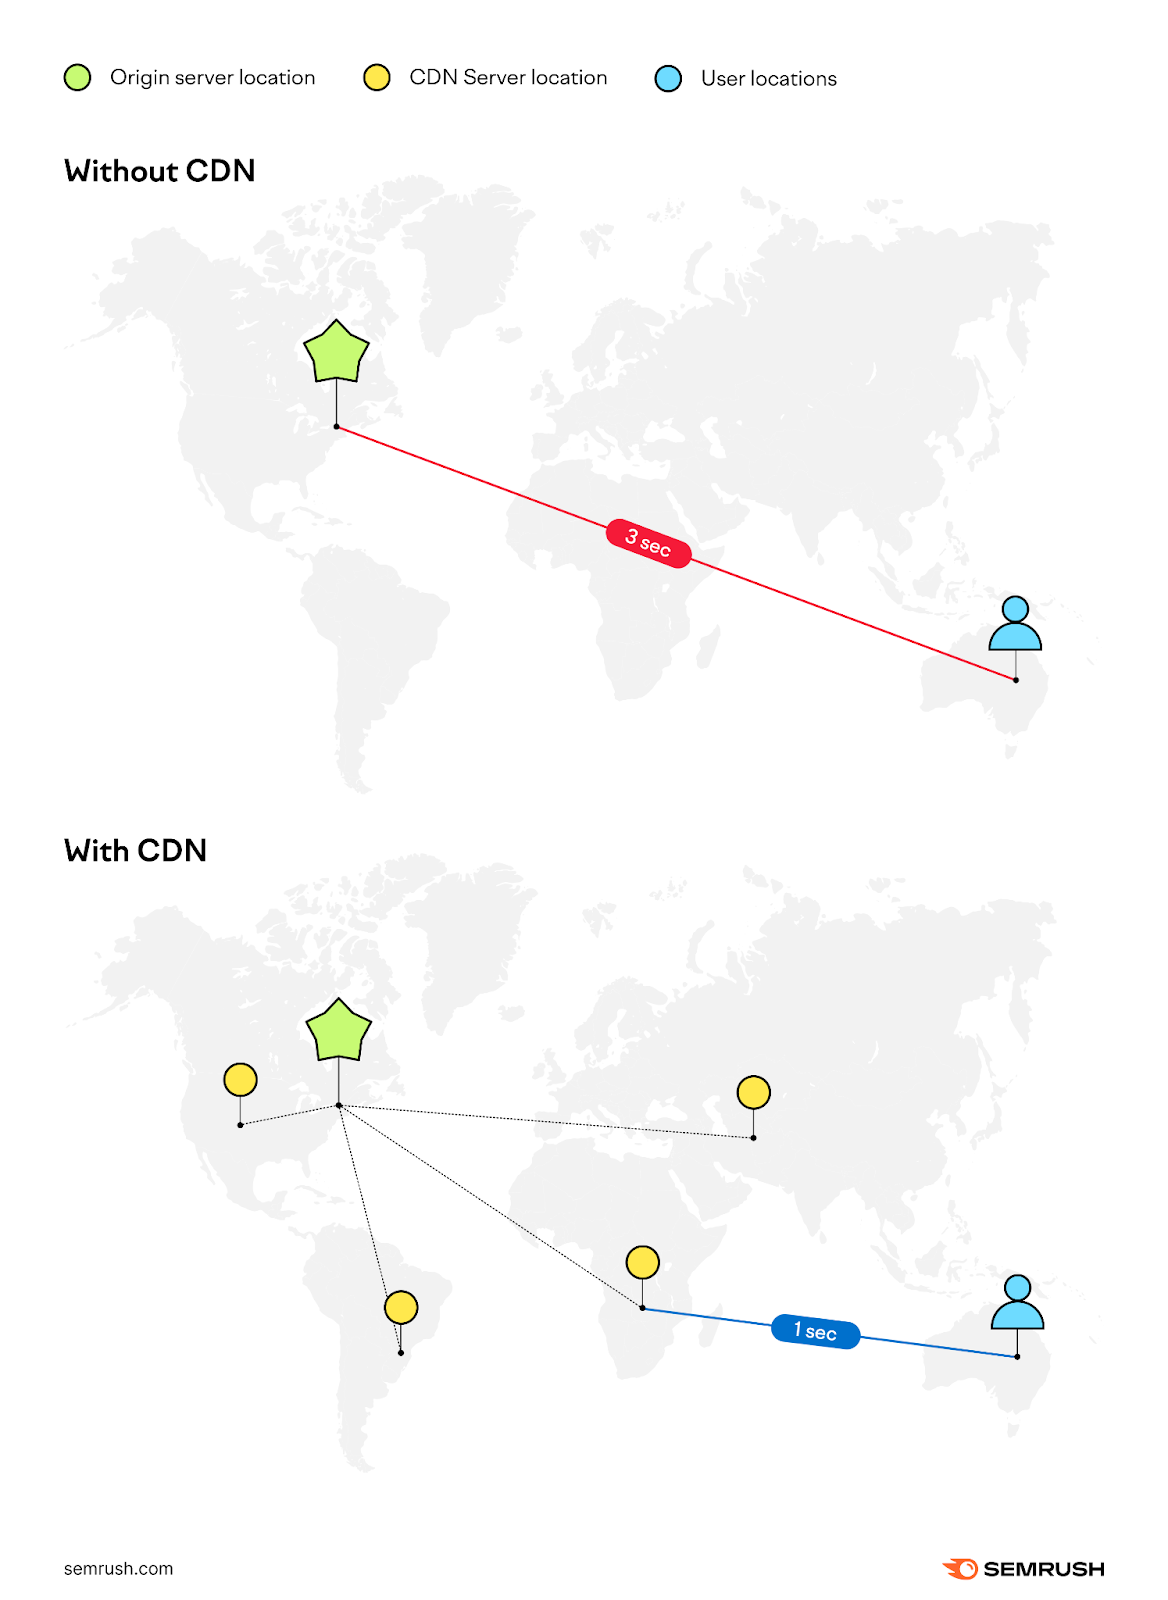 global map showing without cdn and with cdn. With CDN means faster connection with the user.